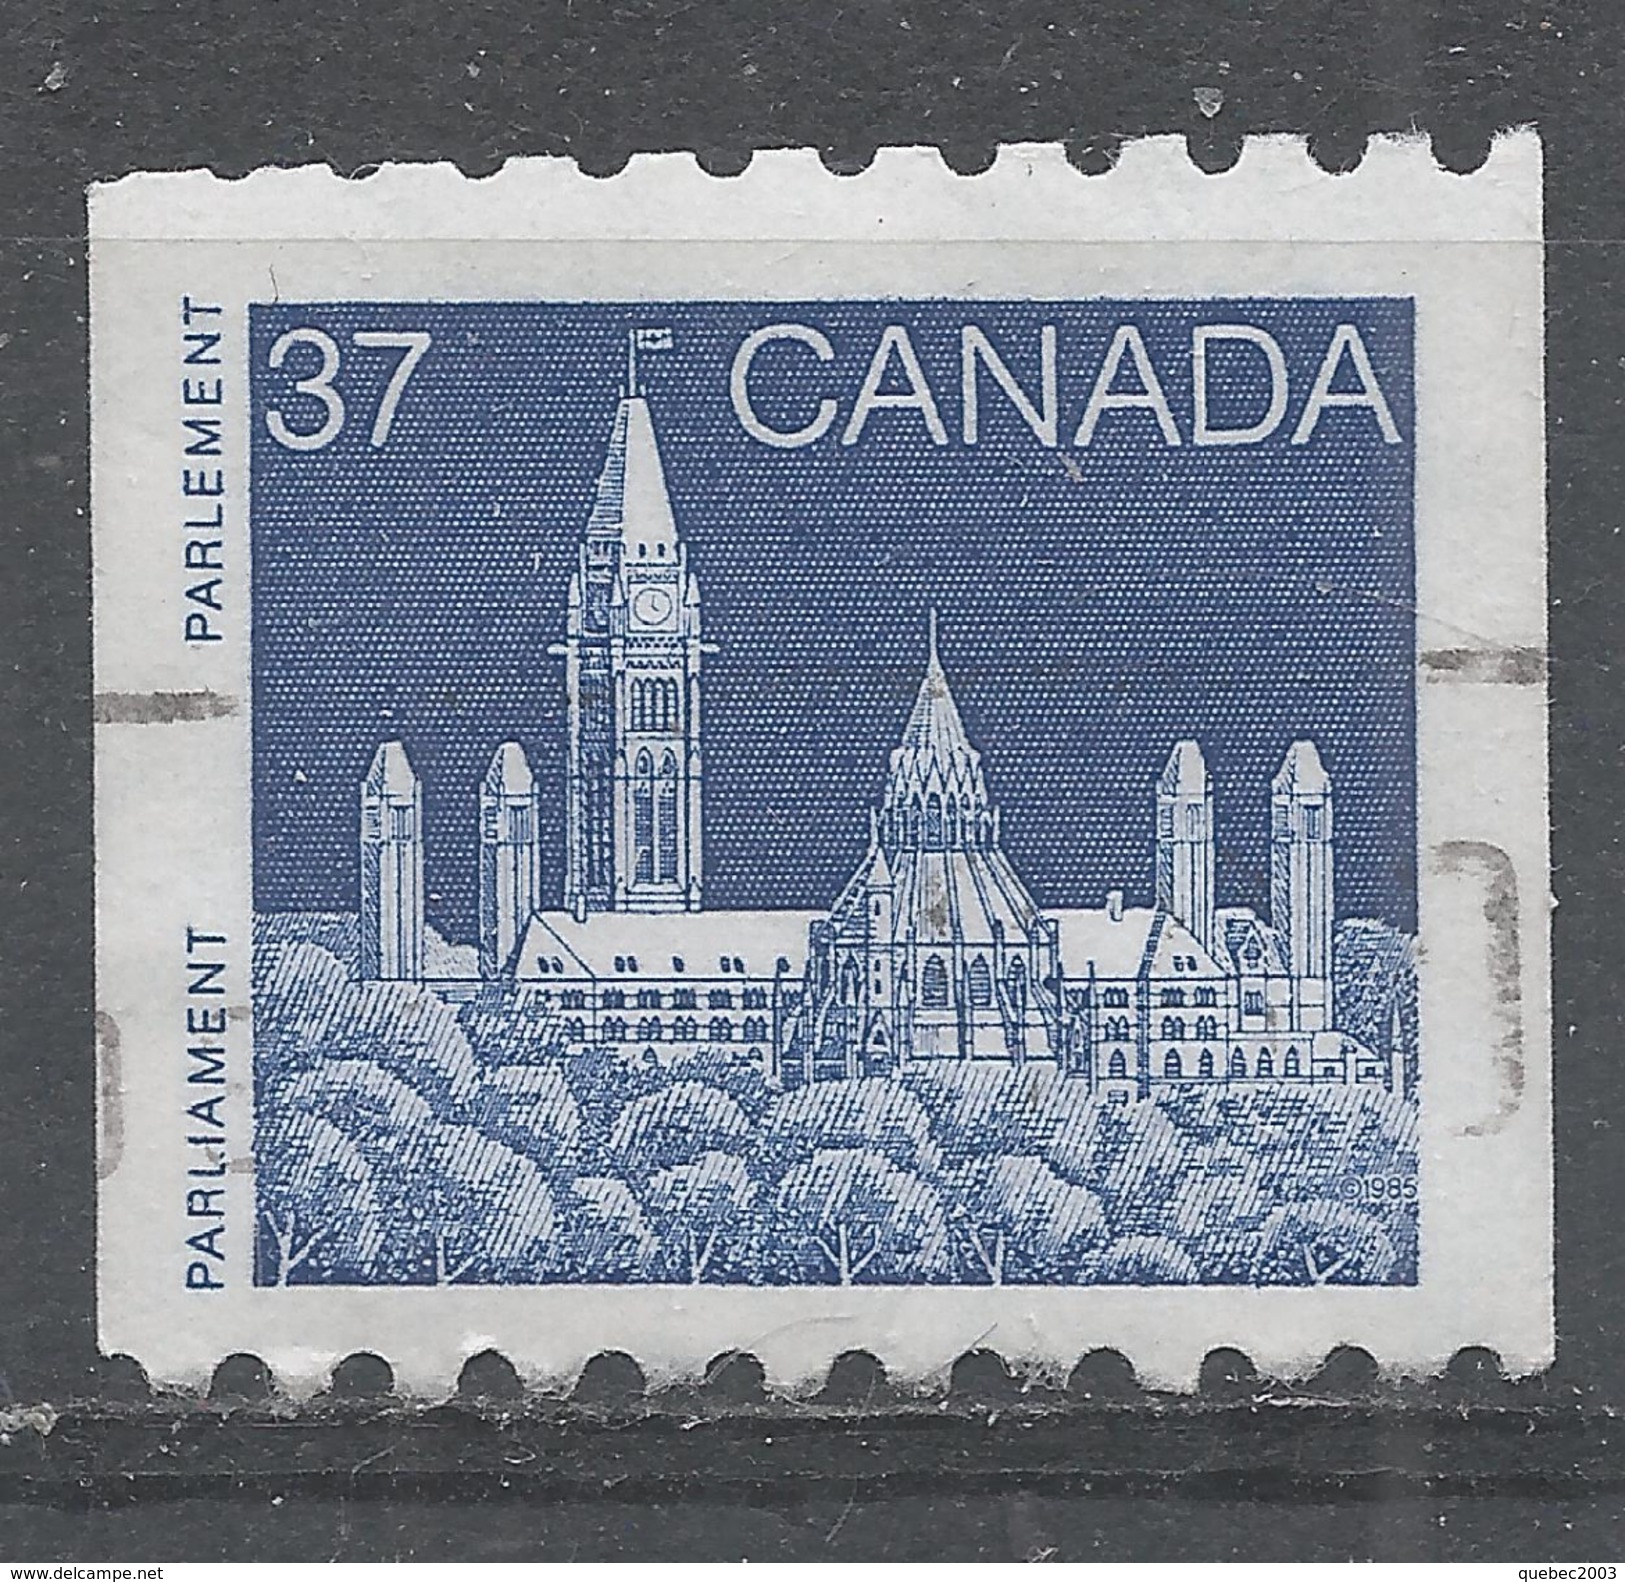 Canada 1988. Scott #1194 (U) Parliament, Library  *Complete Issue* - Coil Stamps